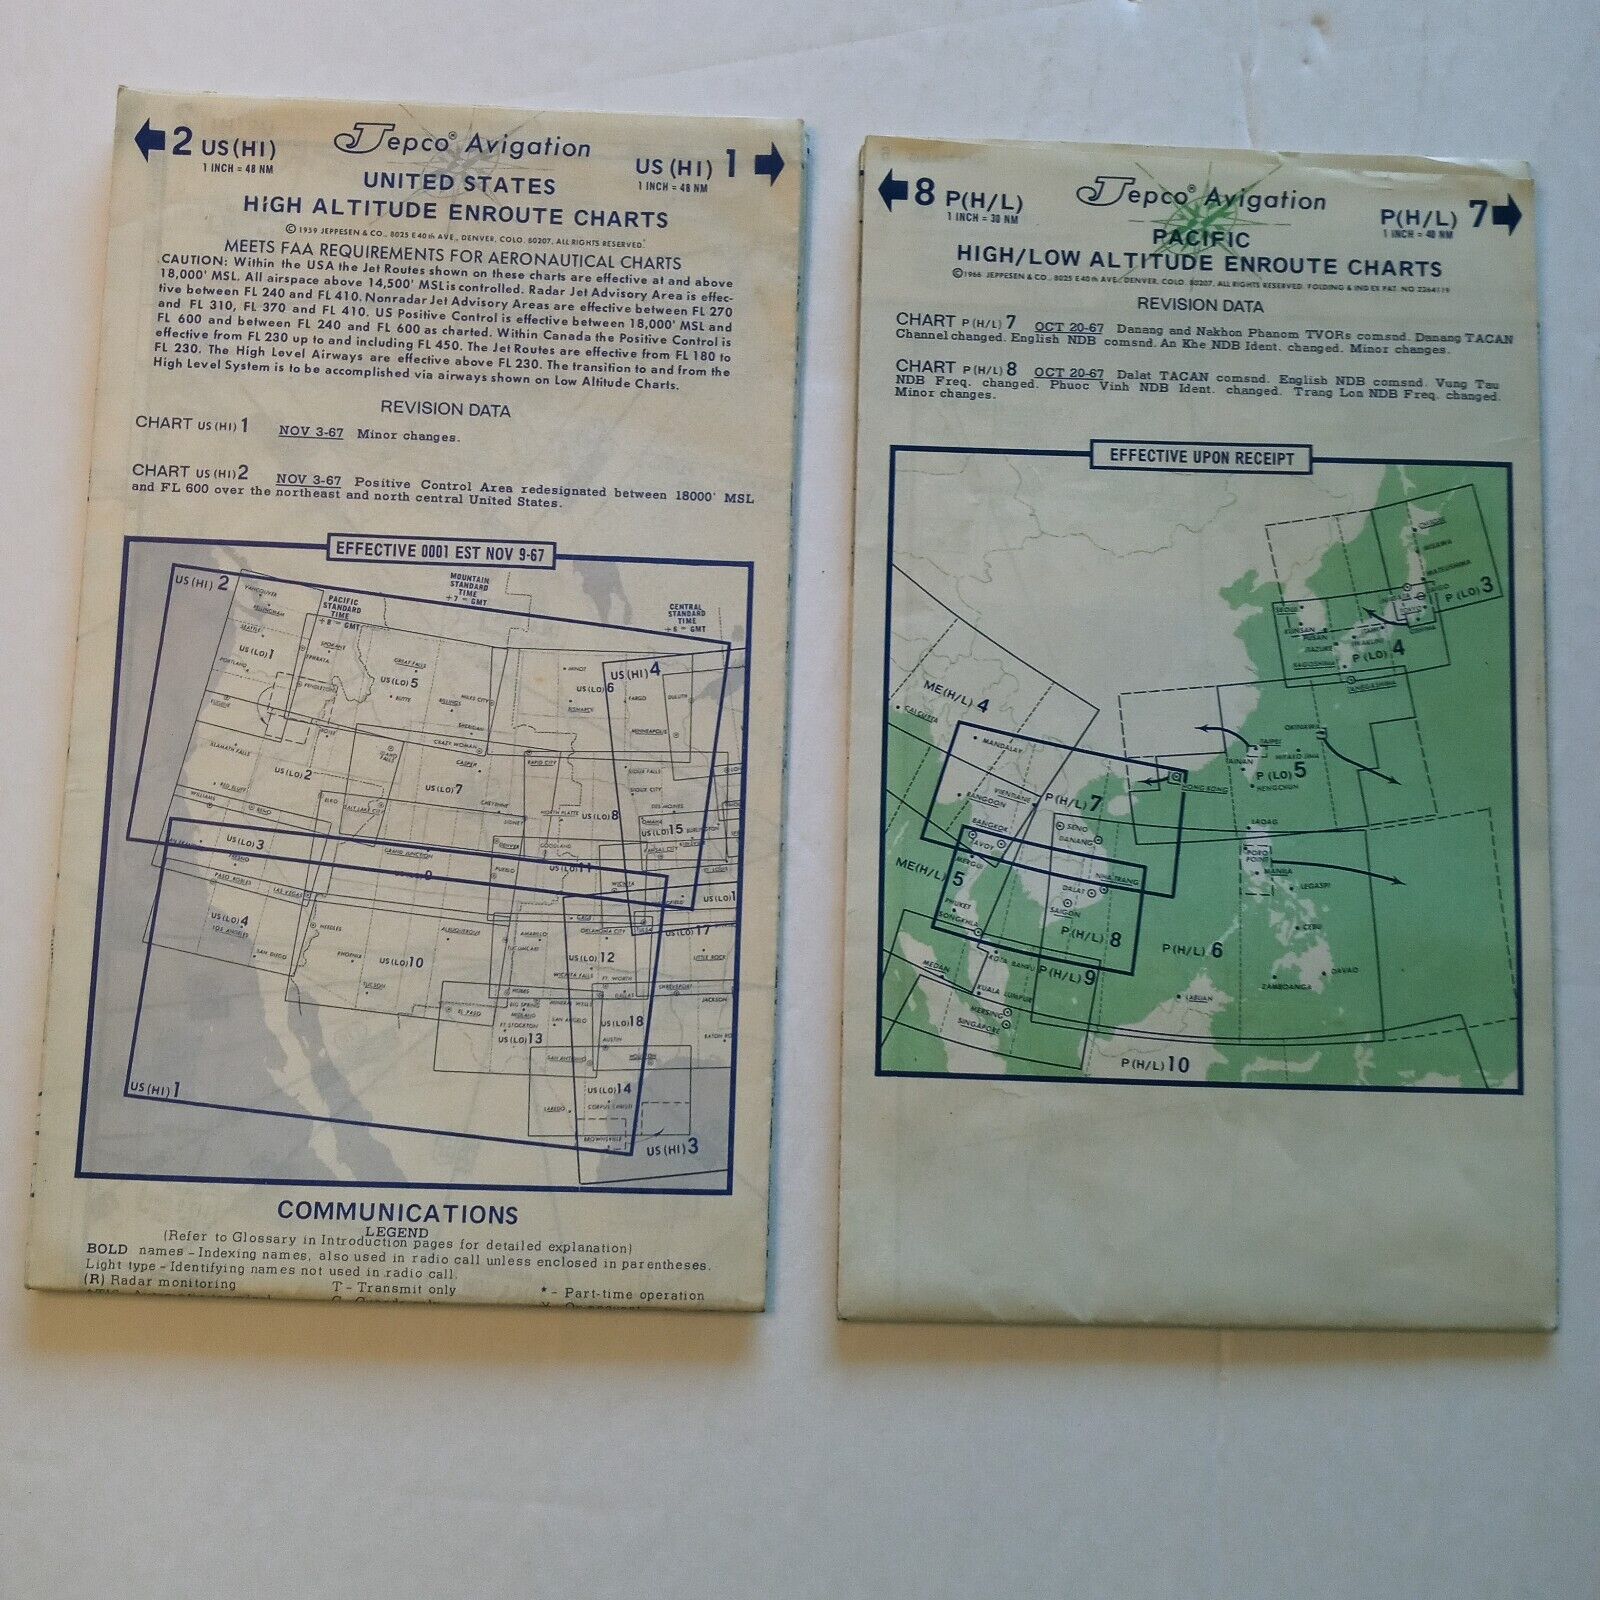 Jepco Navigation High/Low Enroute Charts Pacific, United States 1959 & 1966 Maps